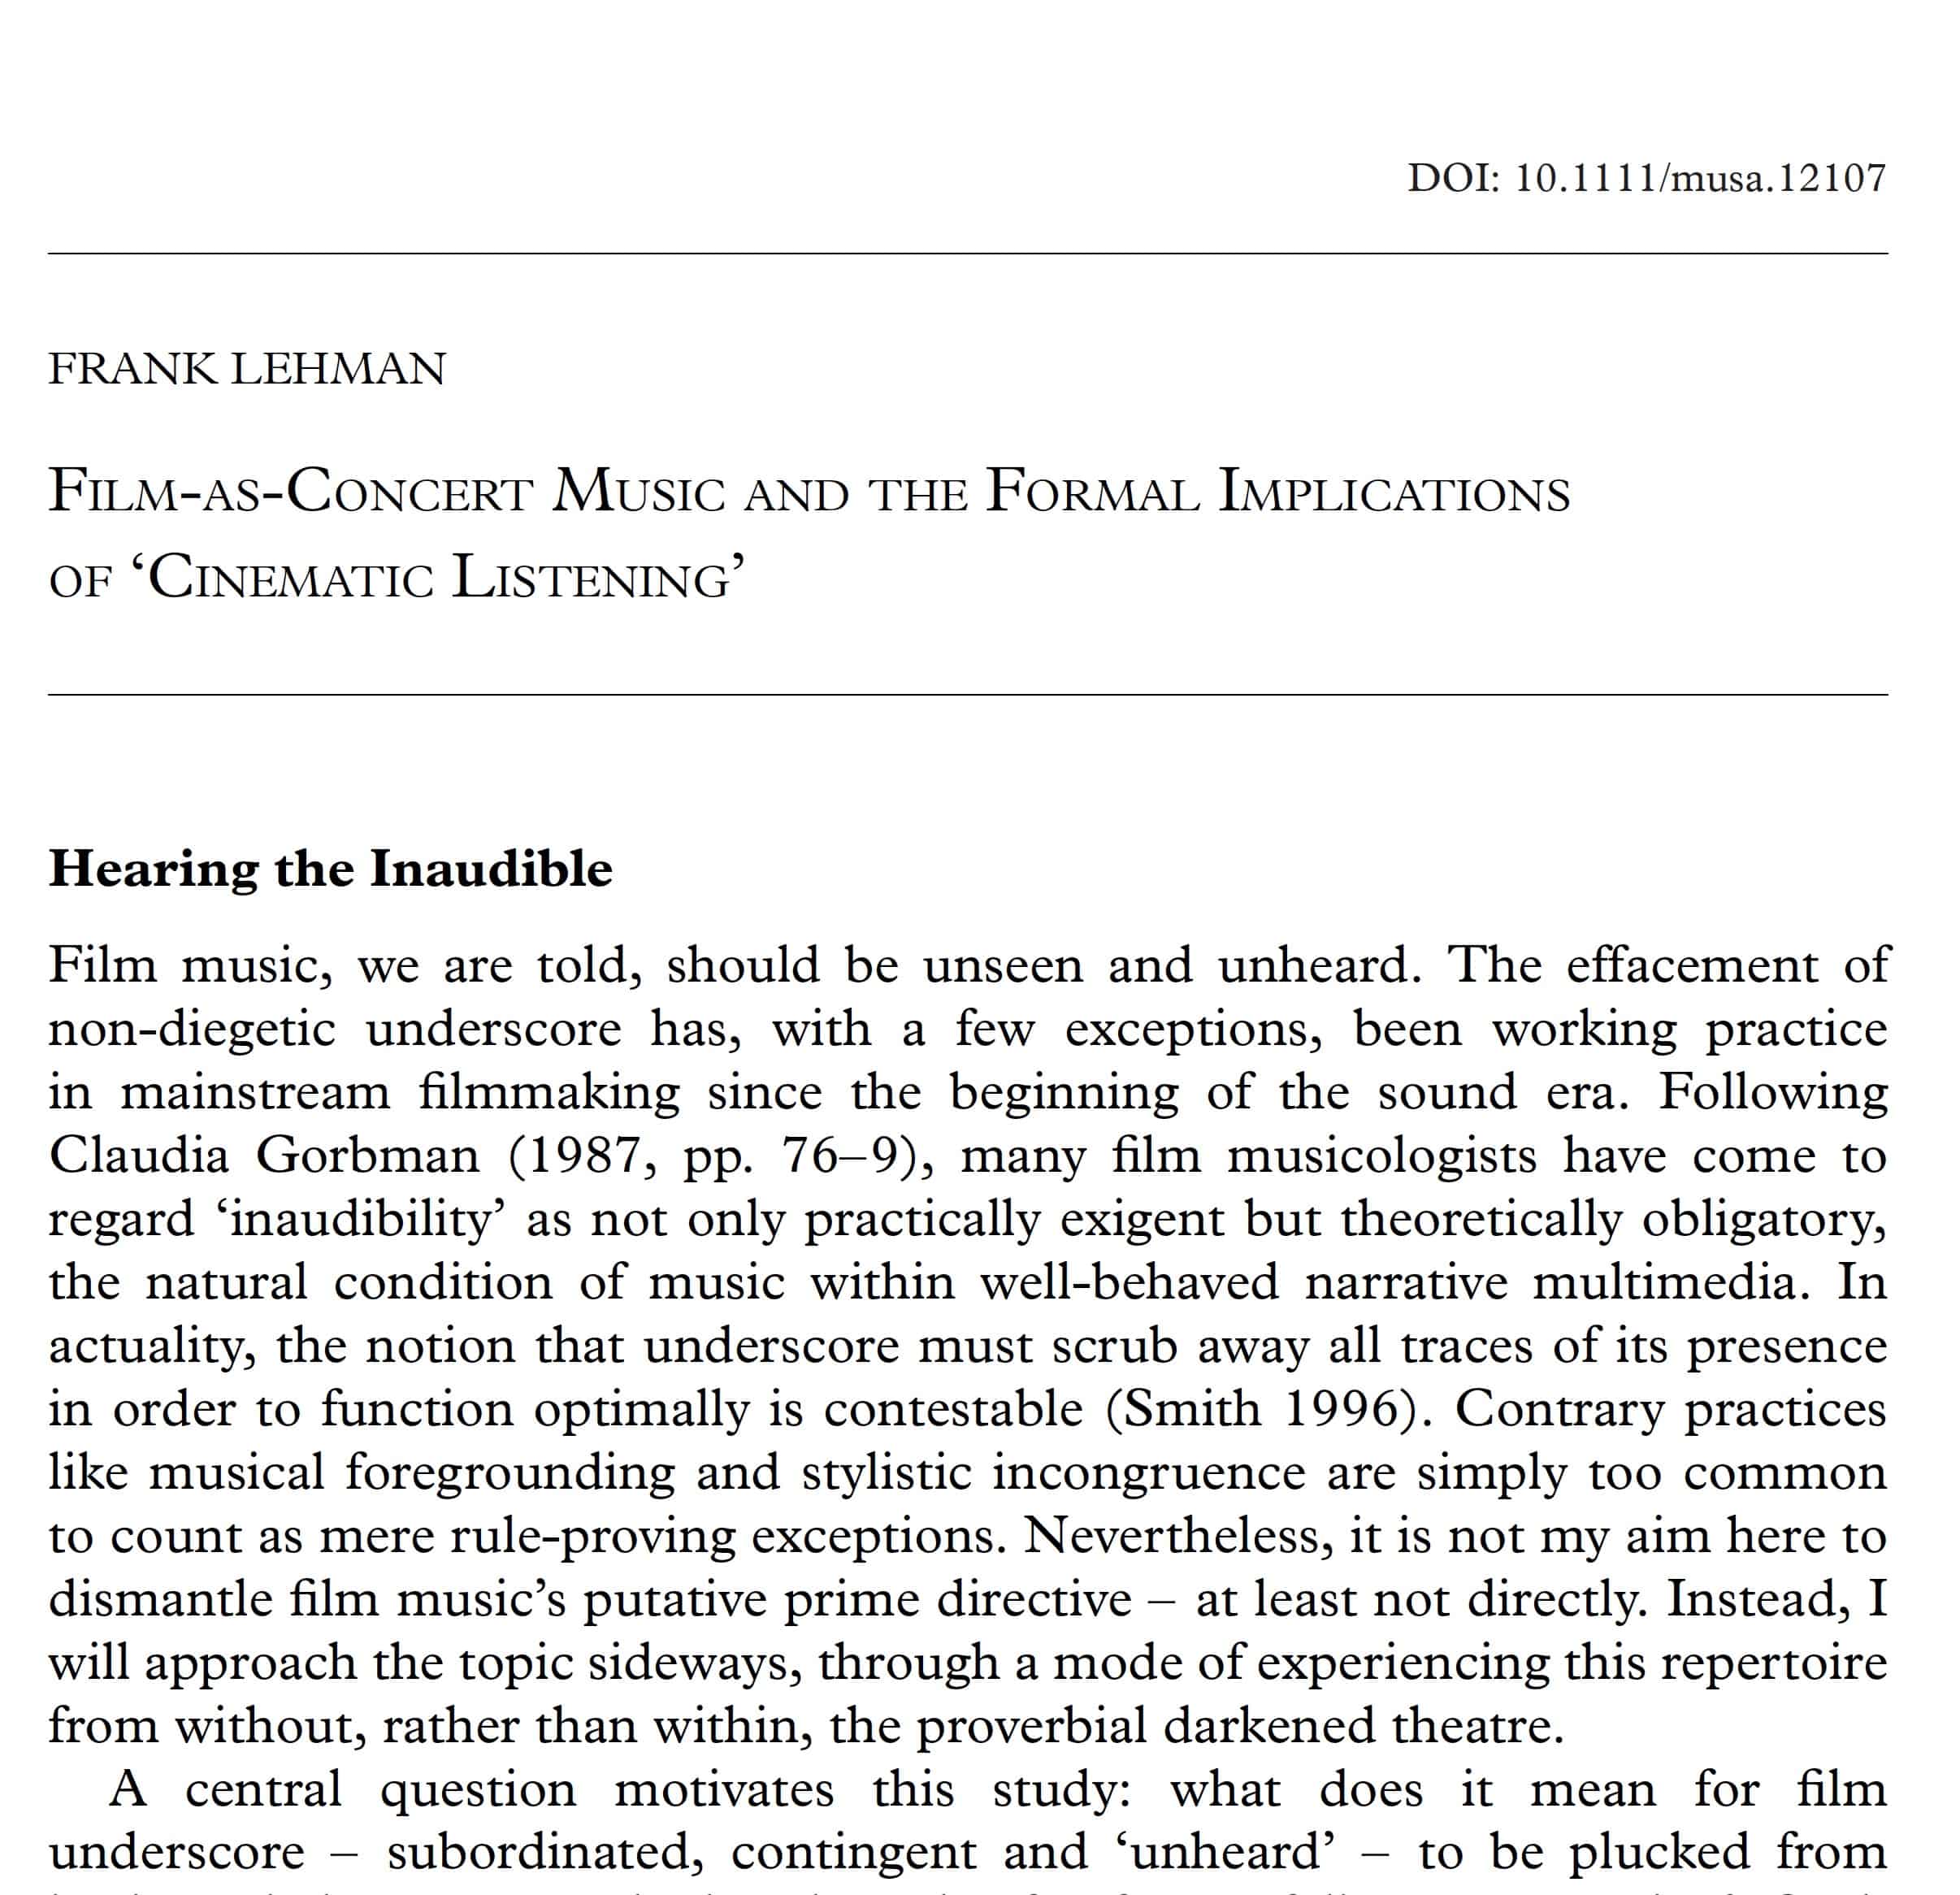 Frank Lehmans Paper Film as Concert Music and the Formal Implications of ‘Cinematic Listening’